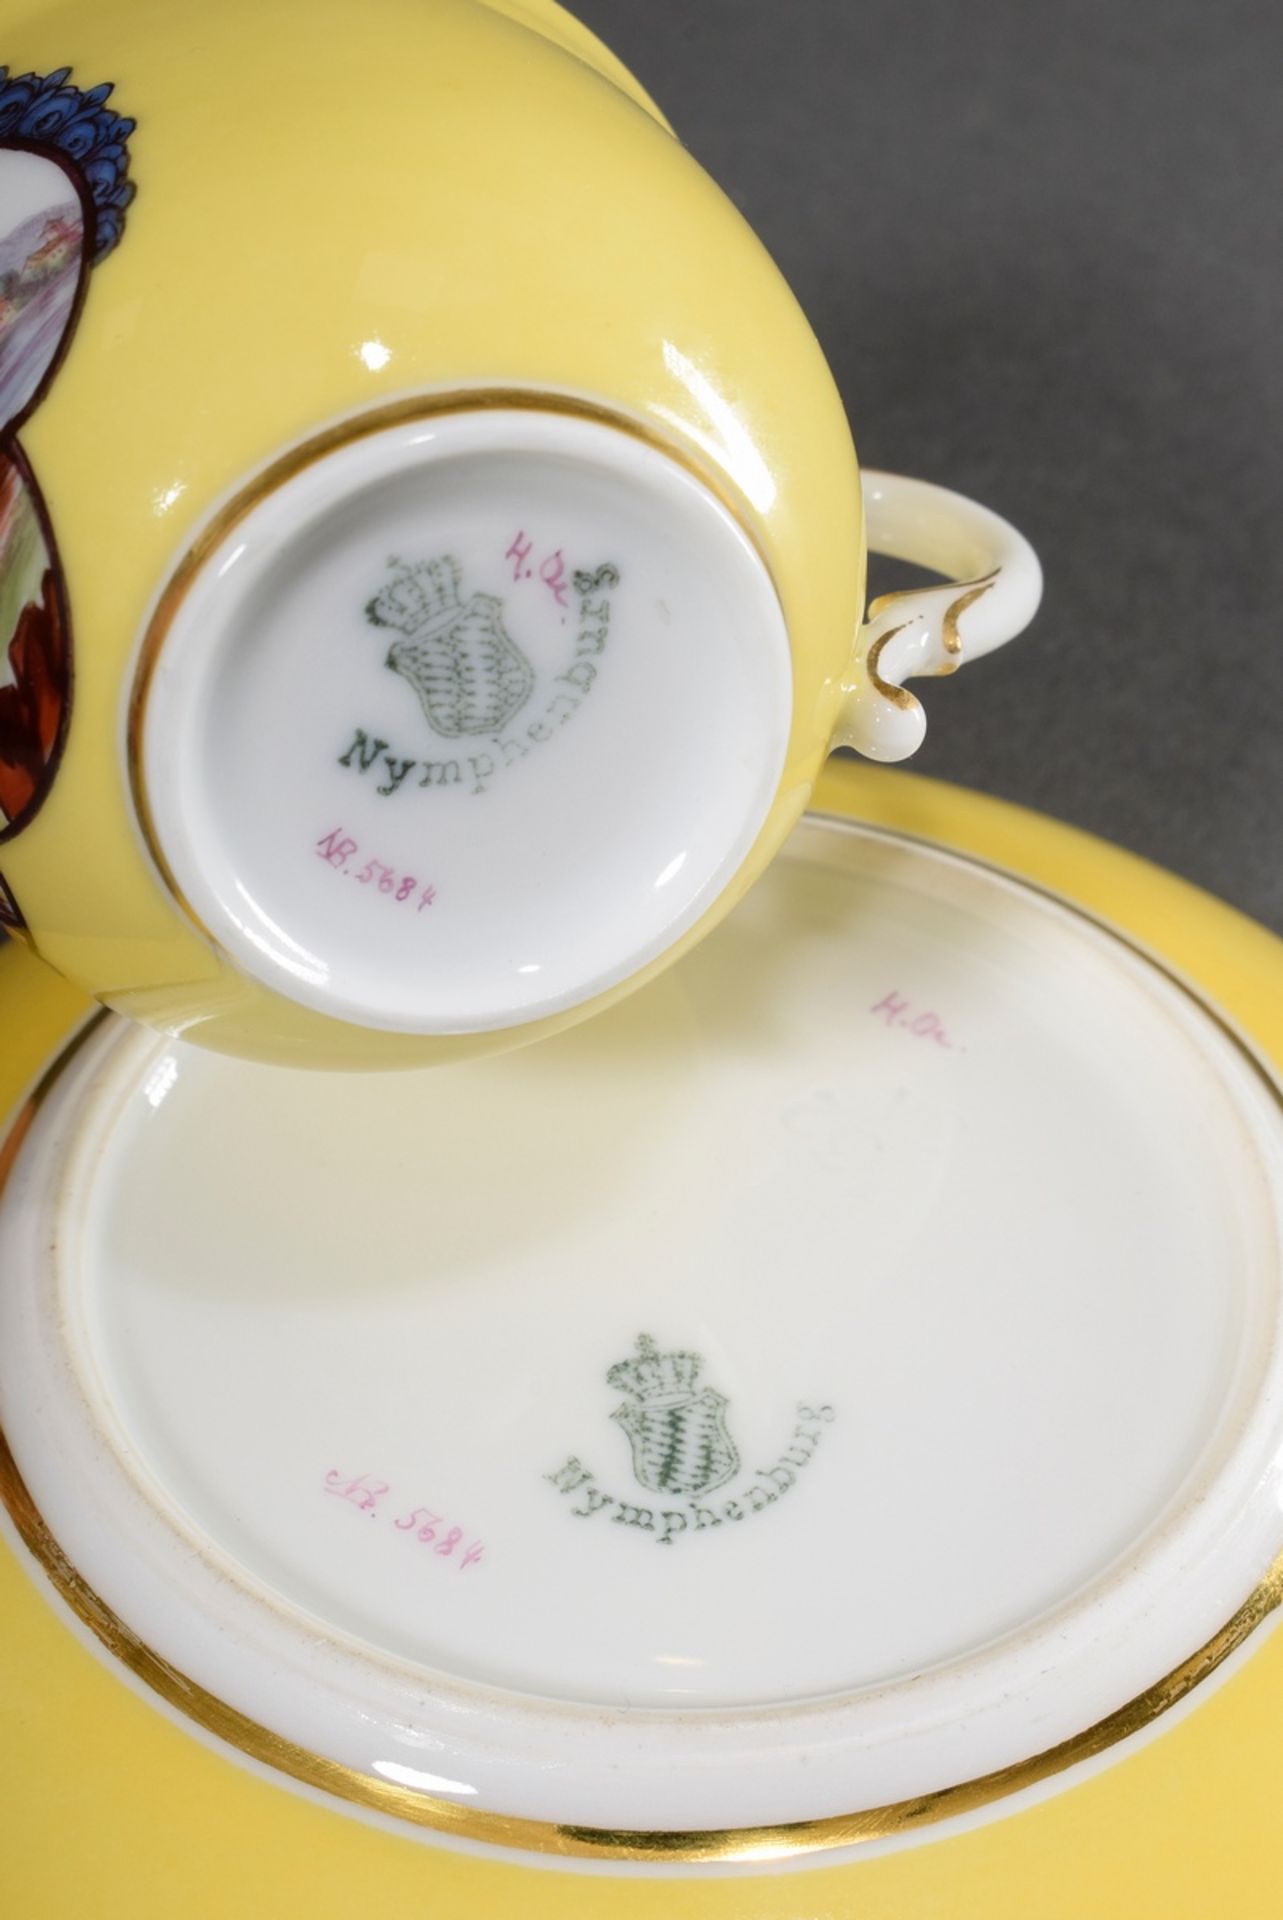 Nymphenburg mocca cups with fine painting "Kauffahrteiszene" in "rose" cartouche on yellow backgrou - Image 4 of 4